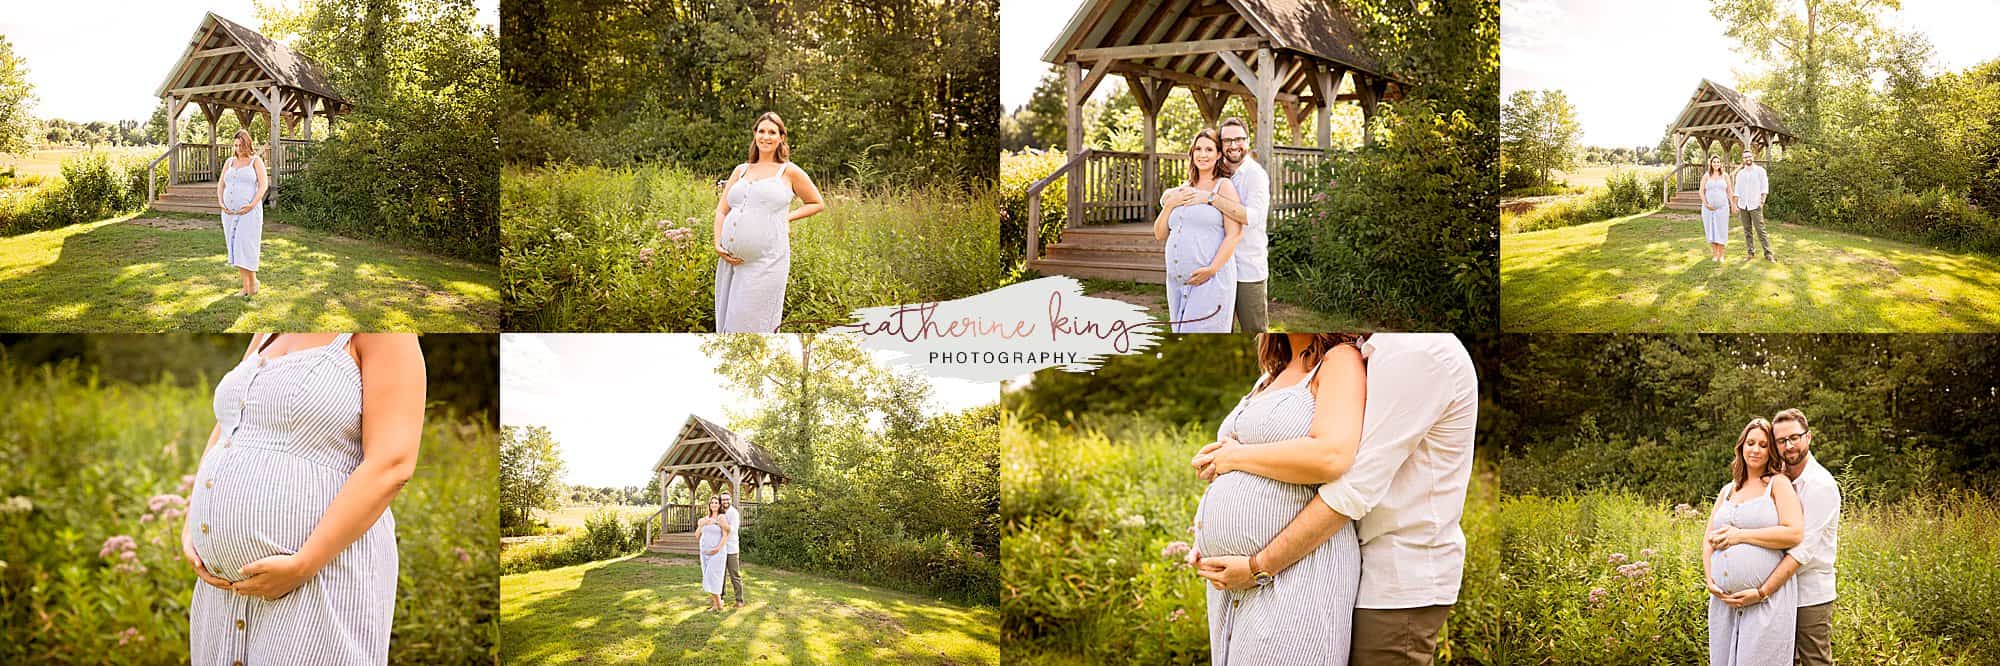 Rustic maternity photoshoot in Madison CT